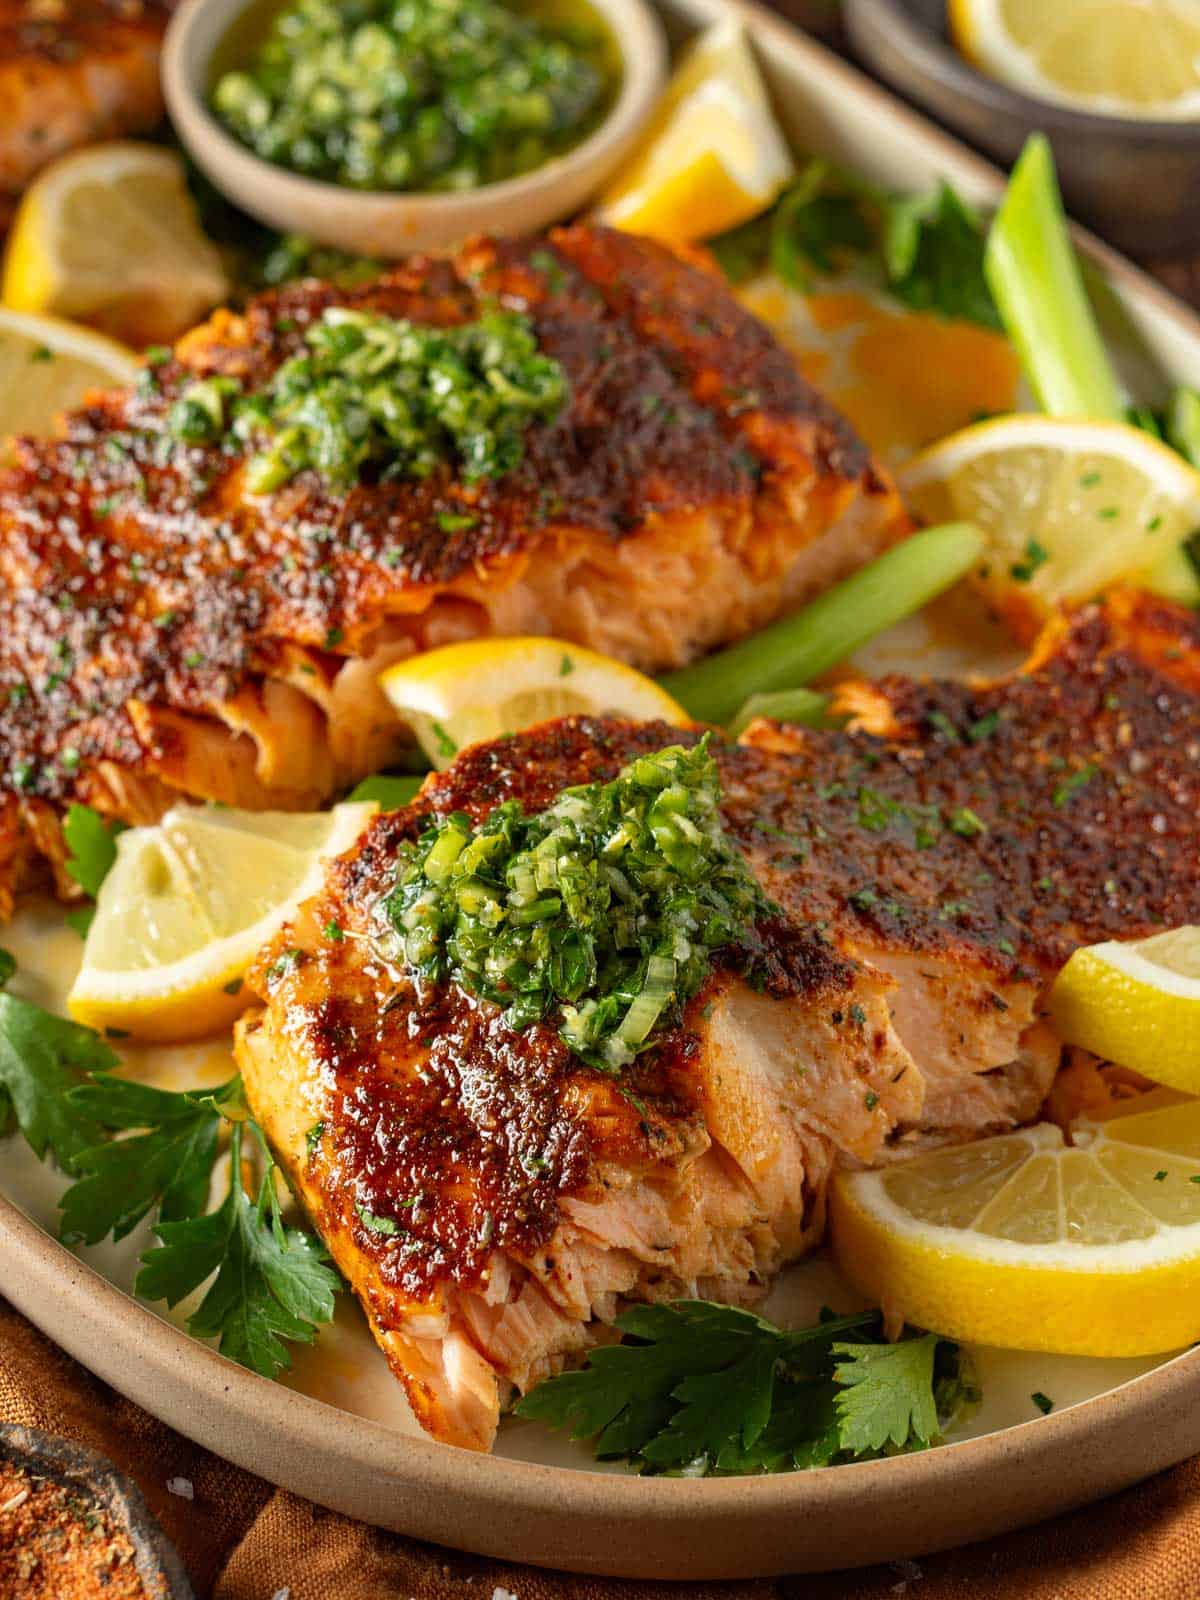 Baked blackened salmon filets with parsley and lemon.